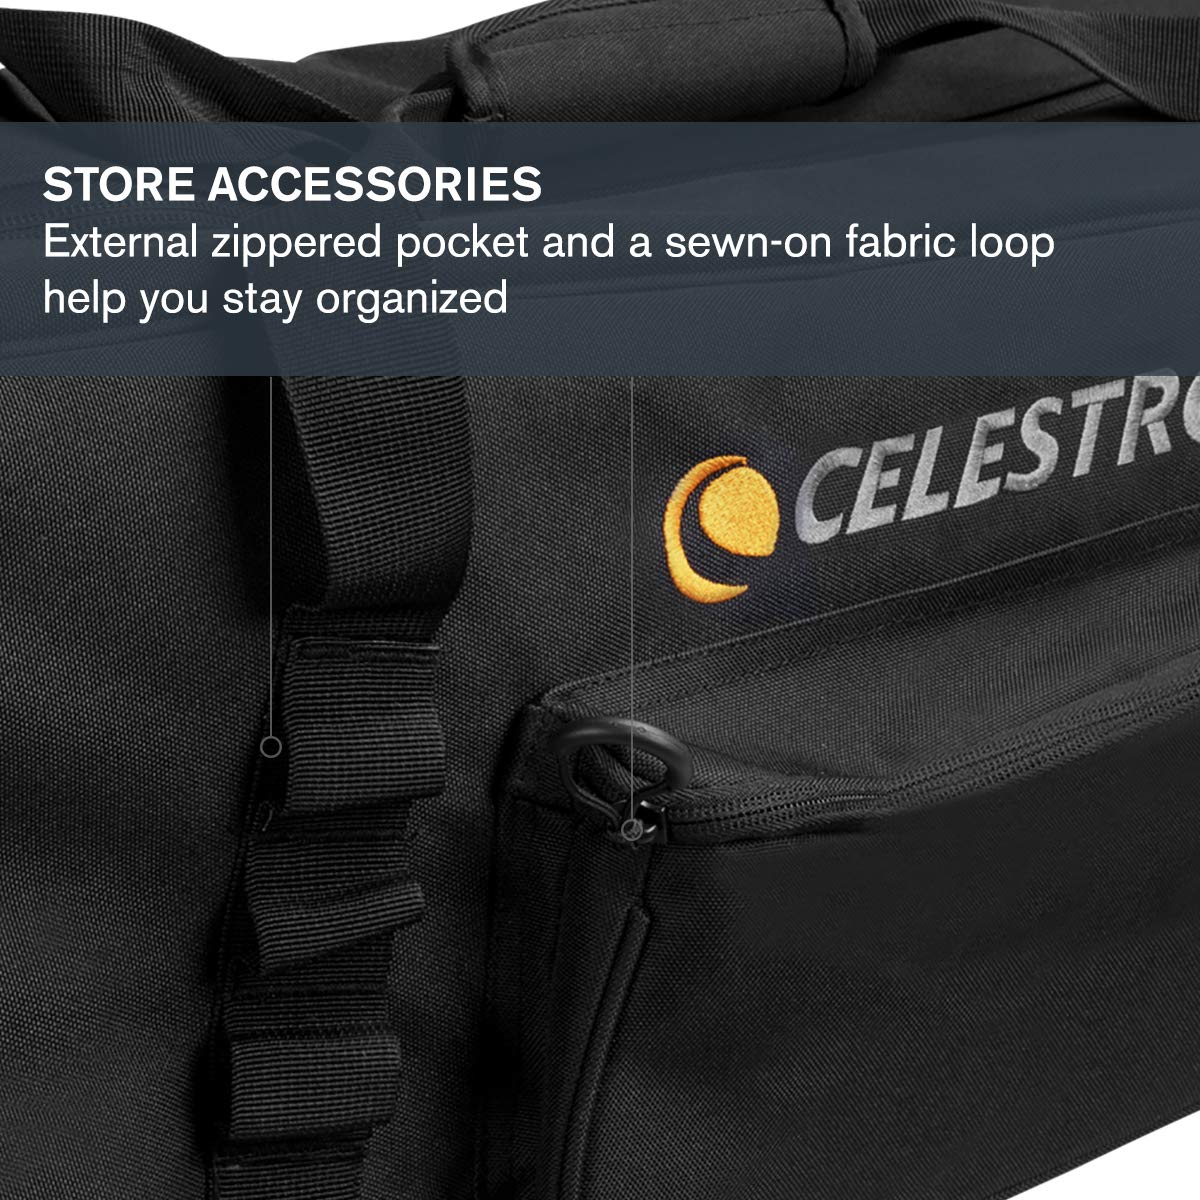 Celestron – 34” Tripod Bag – Storage & Carrying Case for Tripod & Accessories – Durable 900 denier construction – Thick foam walls – Internal straps to secure tripod – Padded arm strap for easy carry